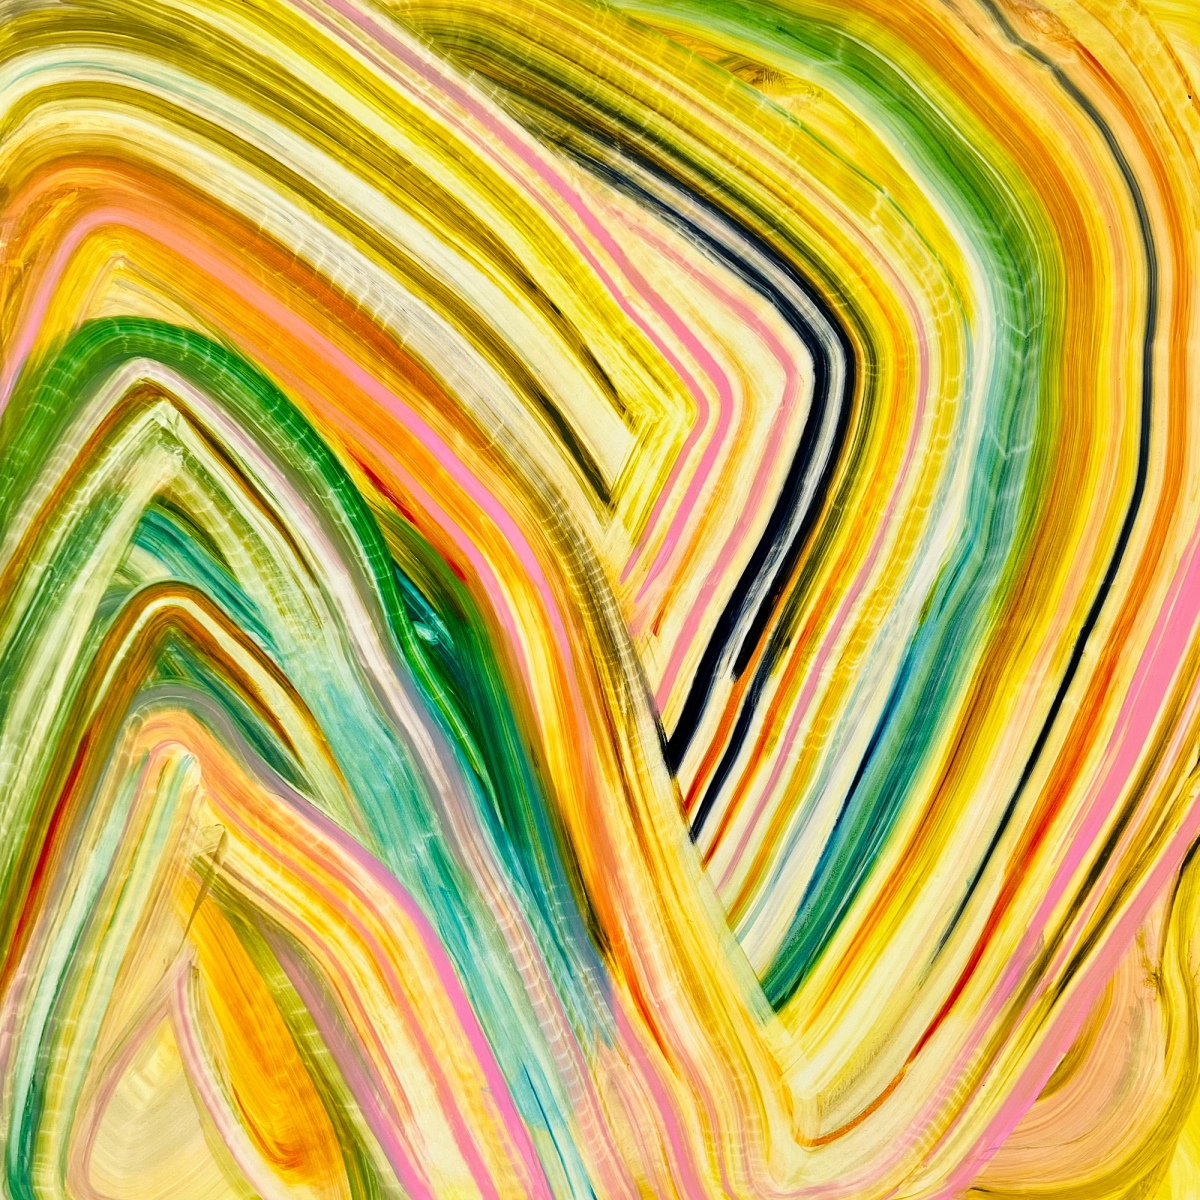 Long upward and downward stripes of yellow with hints of green, orange, pink and black fill a canvas